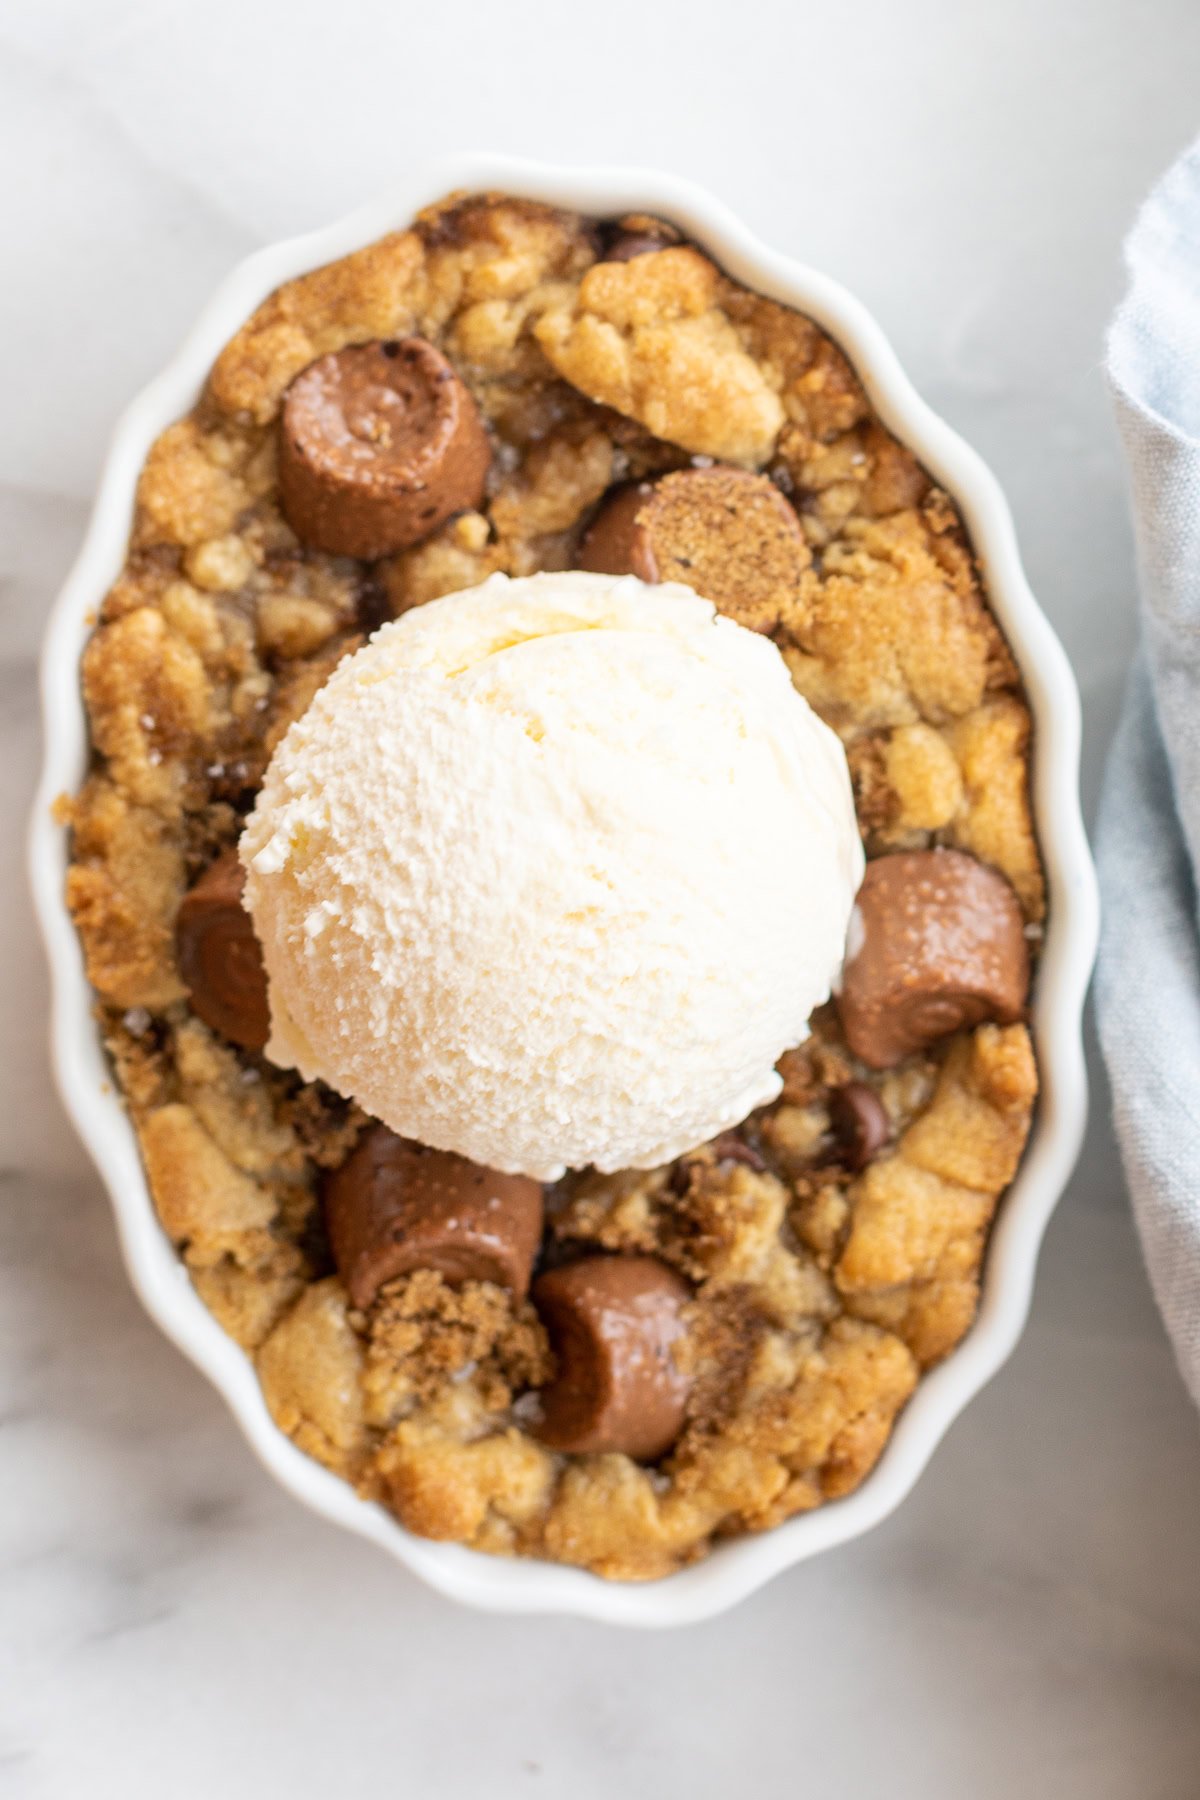 An oval bowl filled with a crumbly chocolate chip cobbler topped with a scoop of vanilla ice cream and small chocolate pieces.